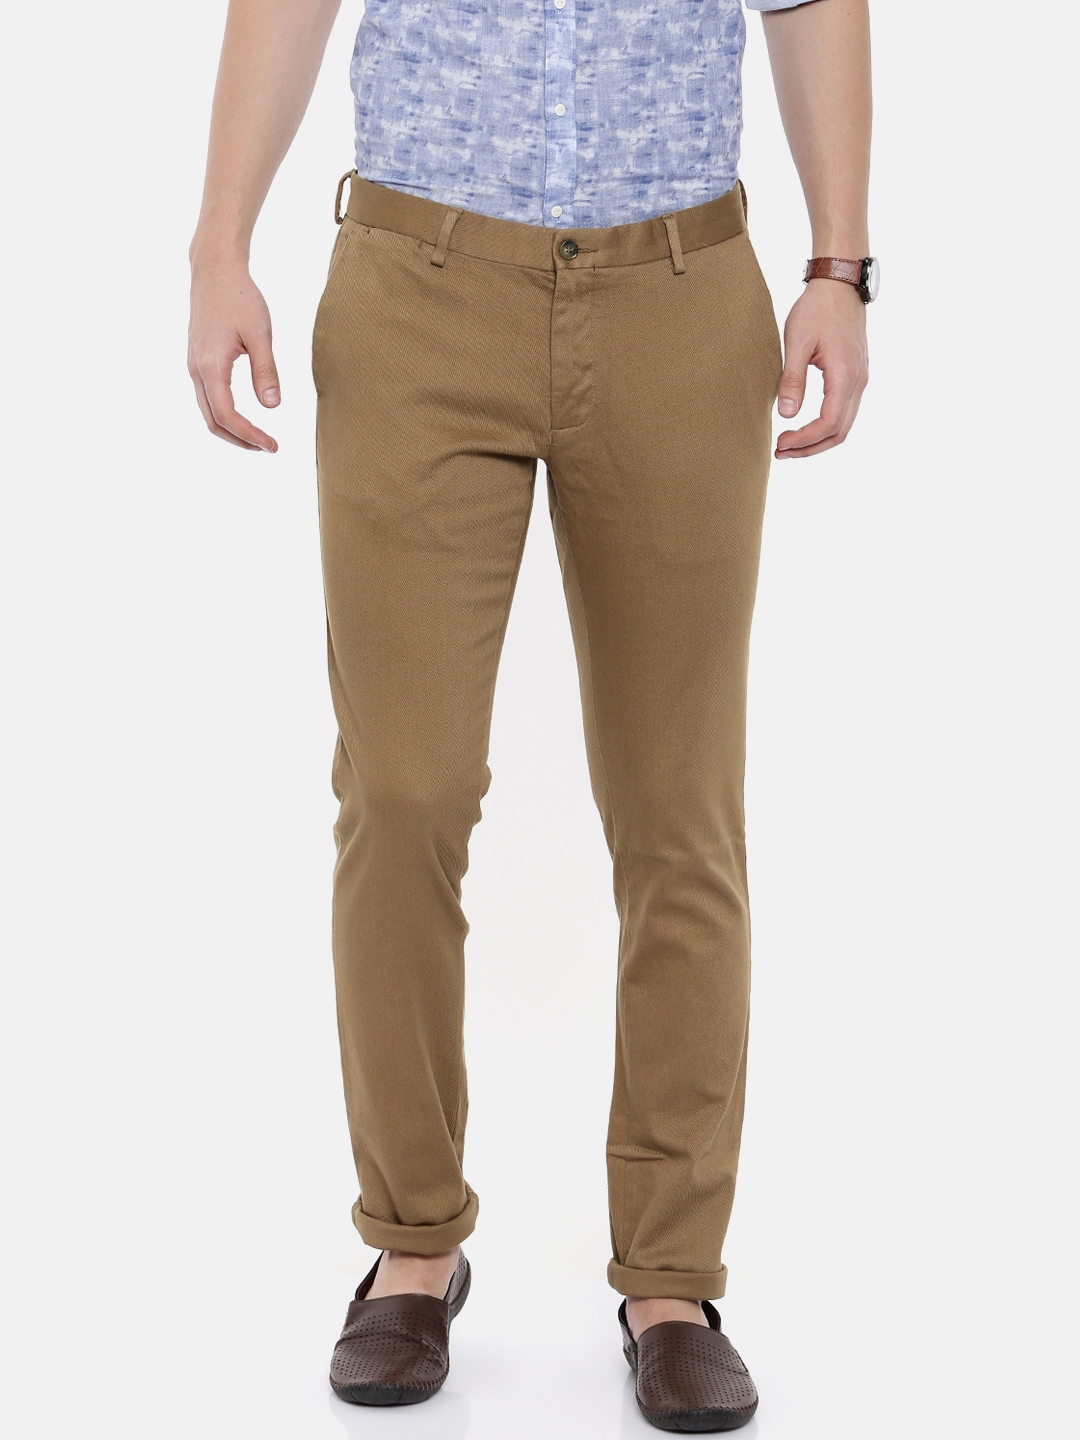 blackberry chinos trousers